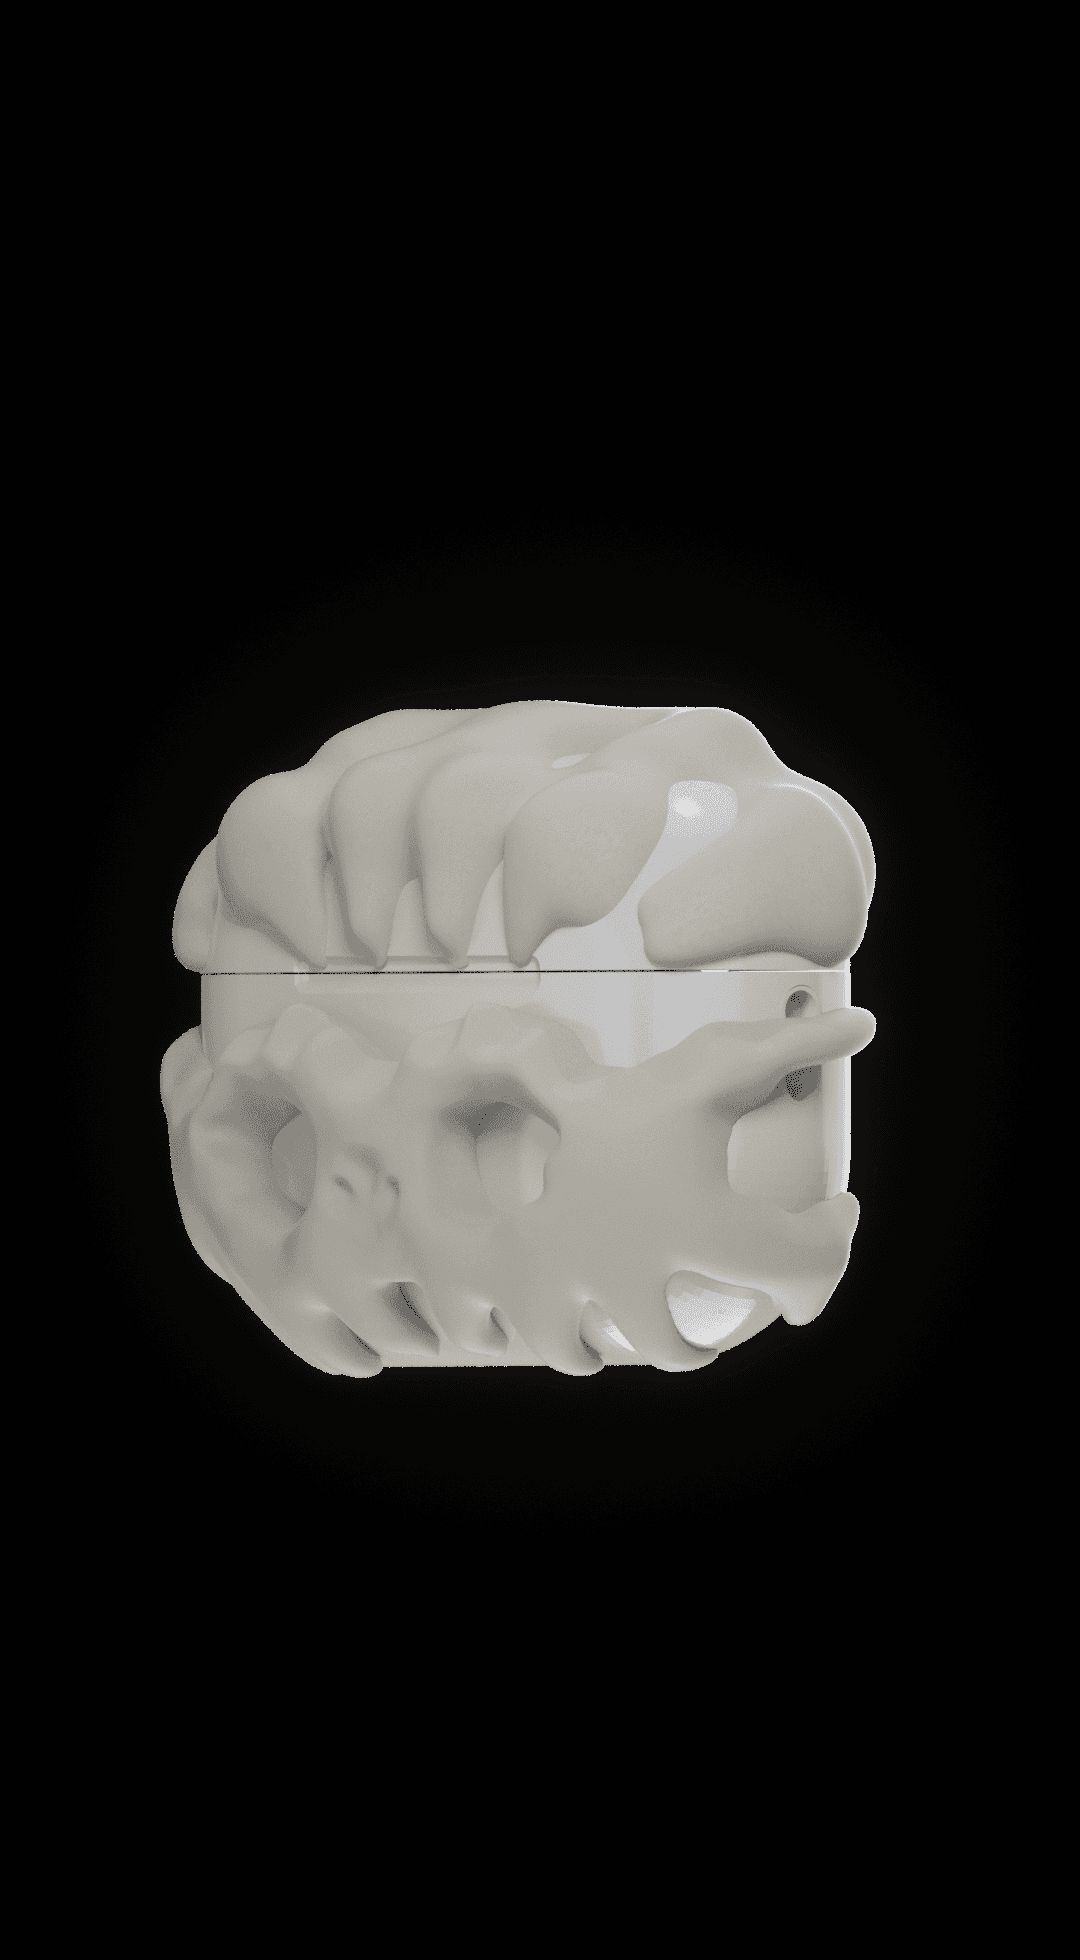 SKULL CAGE AIRPODS PRO 1/2 CASE 3d model